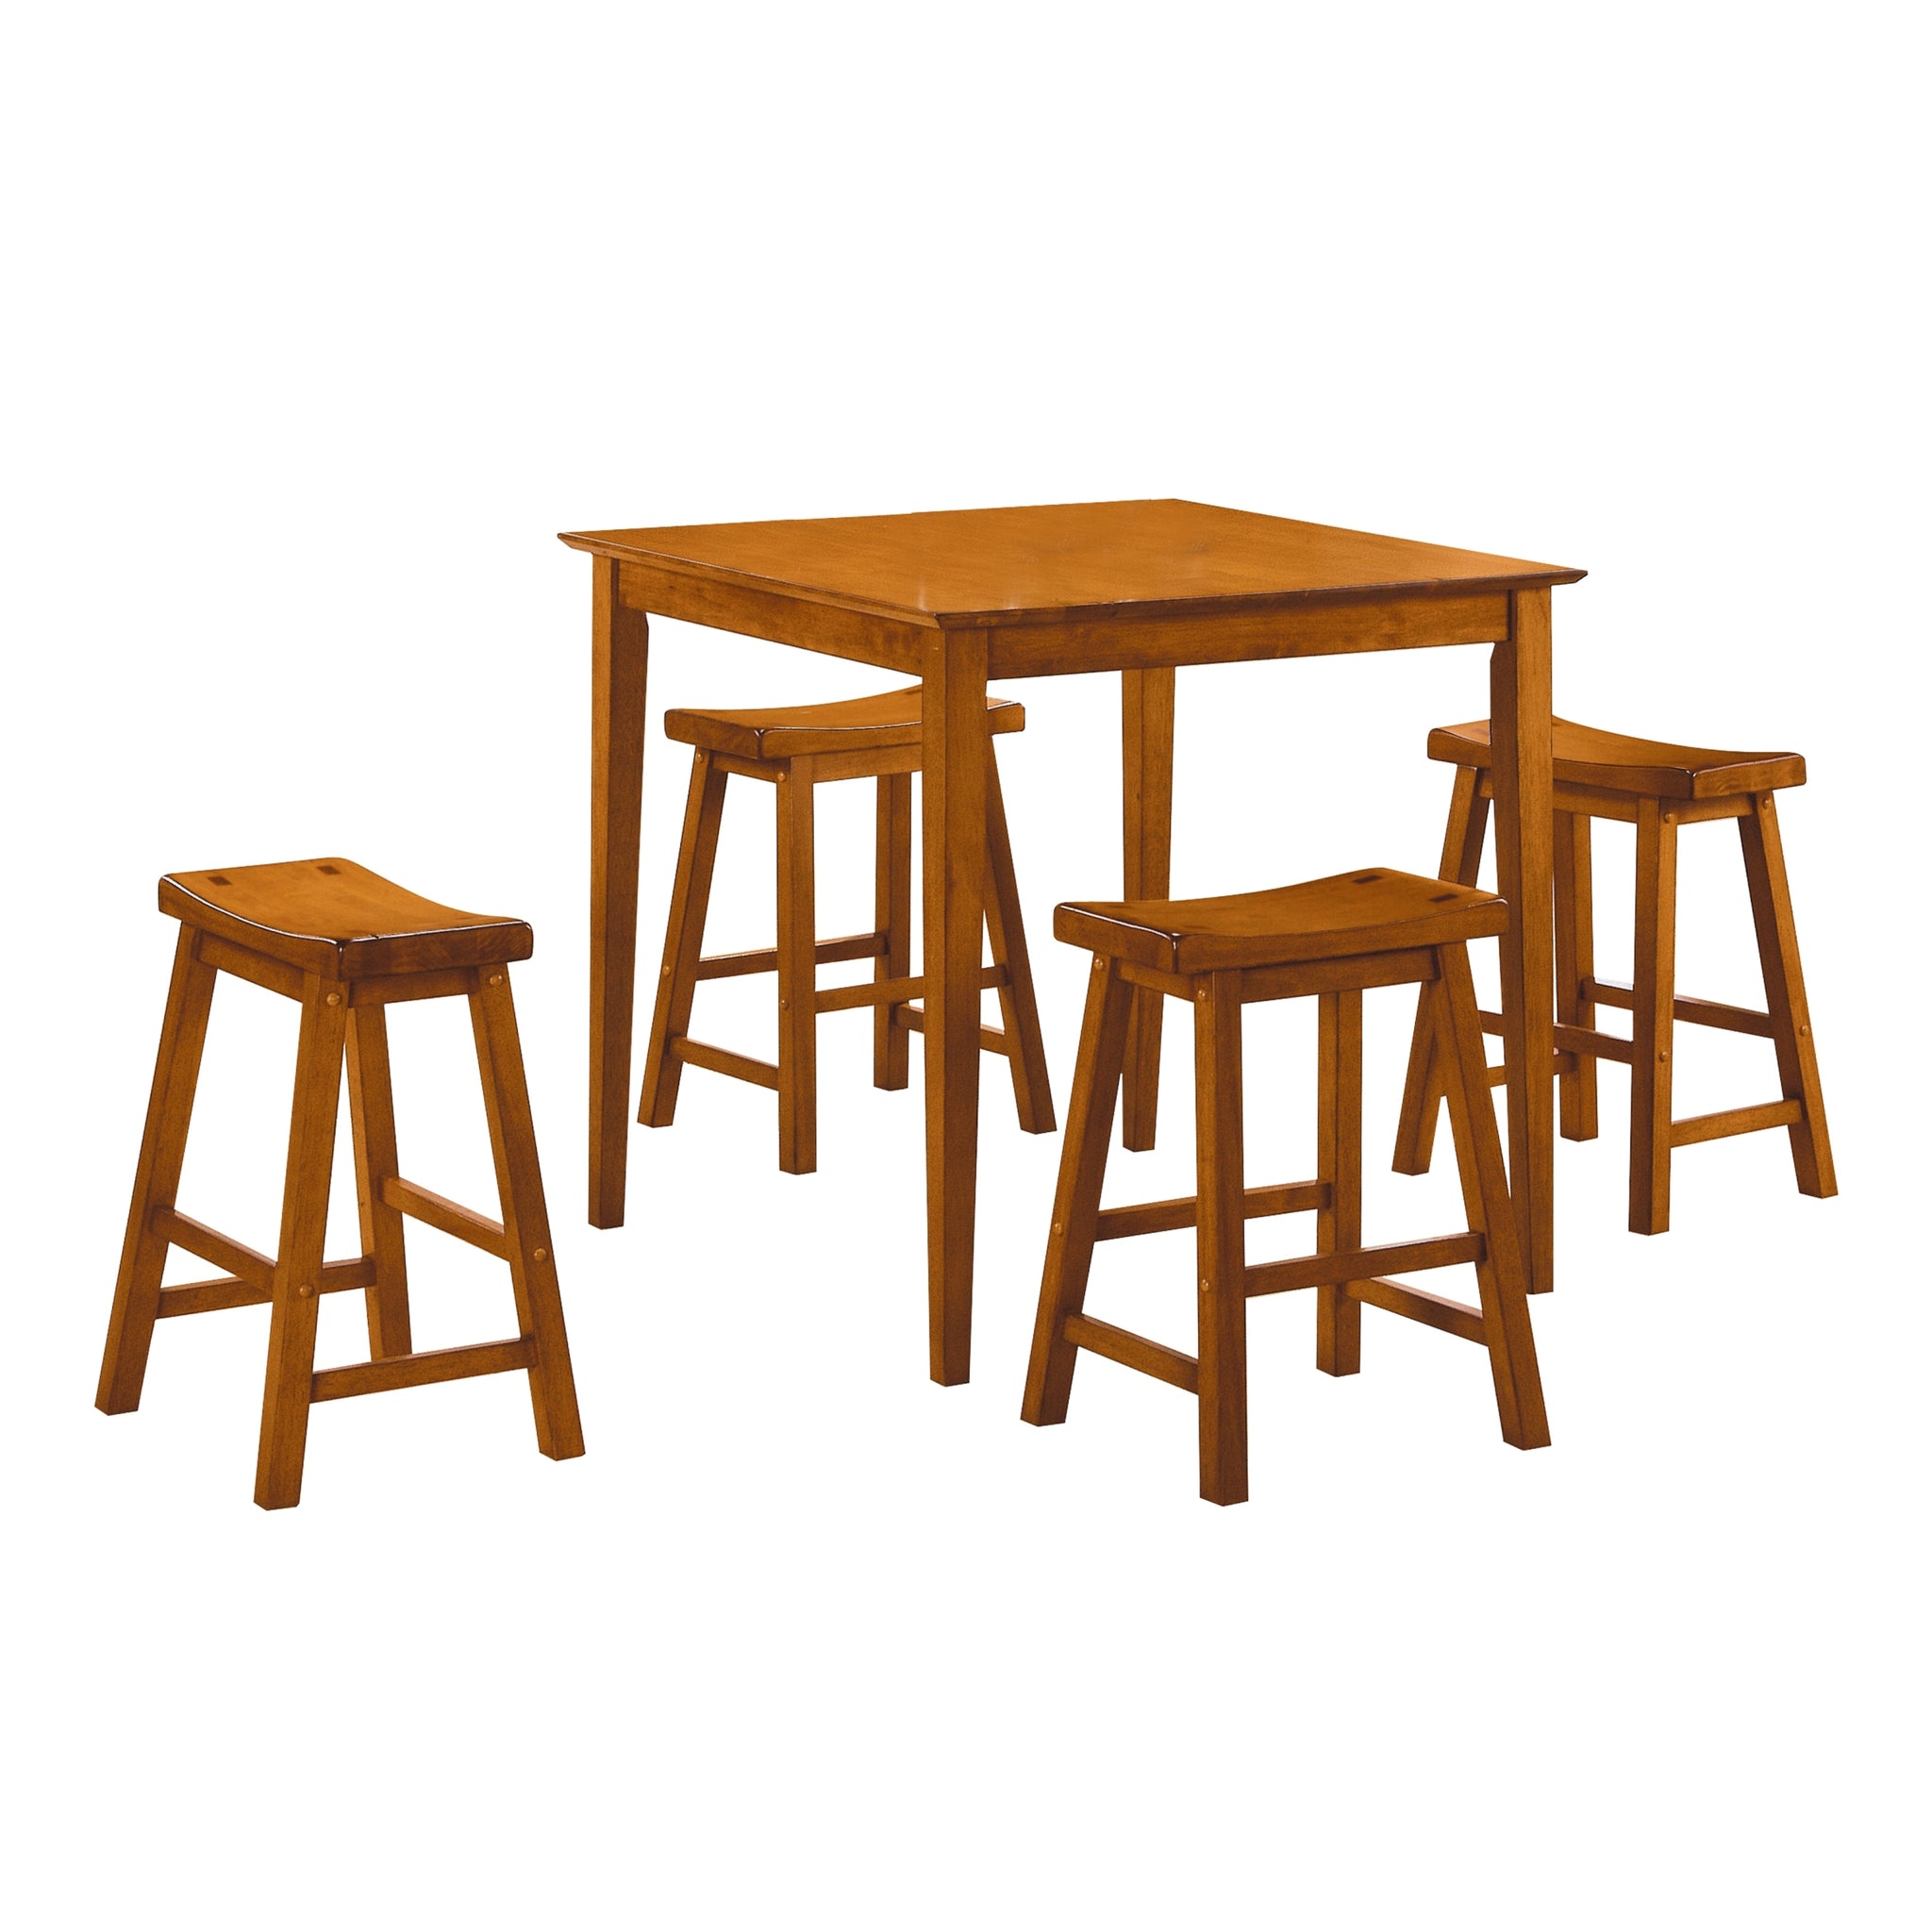 Casual Dining 18 inch Height Saddle Seat Stools 2pc oak-dining room-solid wood